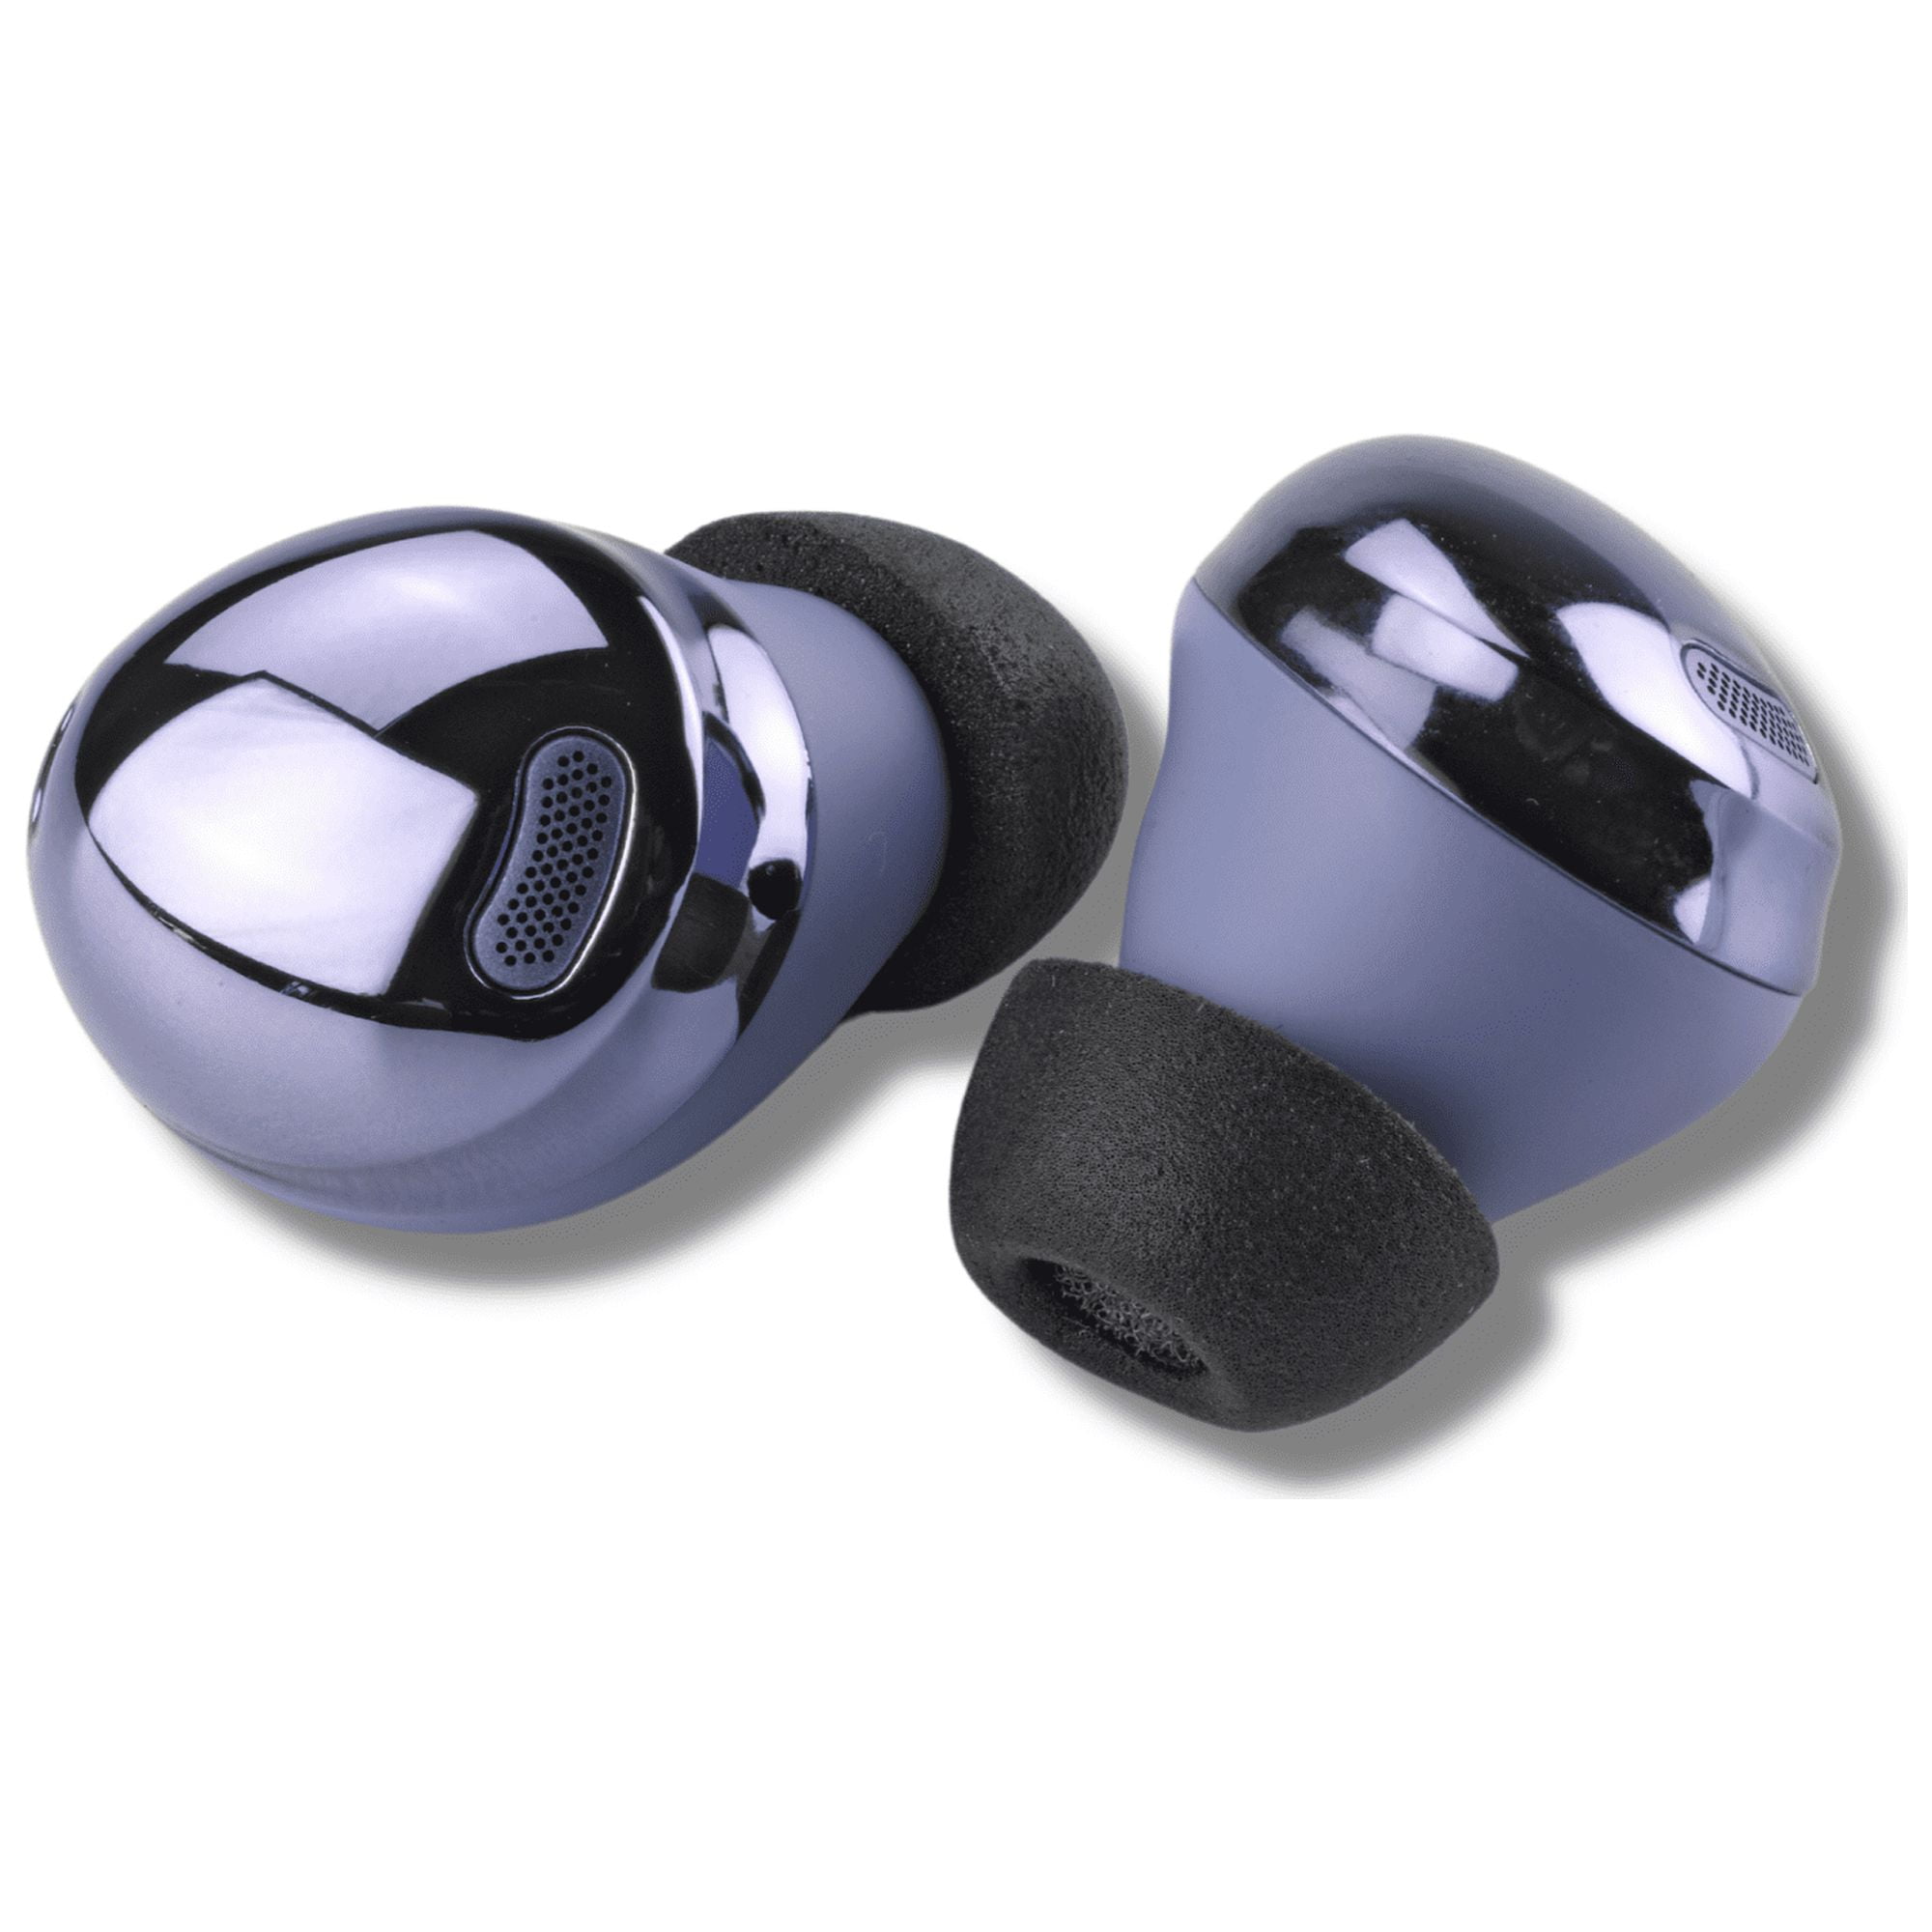  Comply Foam Ear Tips for Apple AirPods Pro Generation 1 & 2,  Ultimate Comfort, Unshakeable Fit